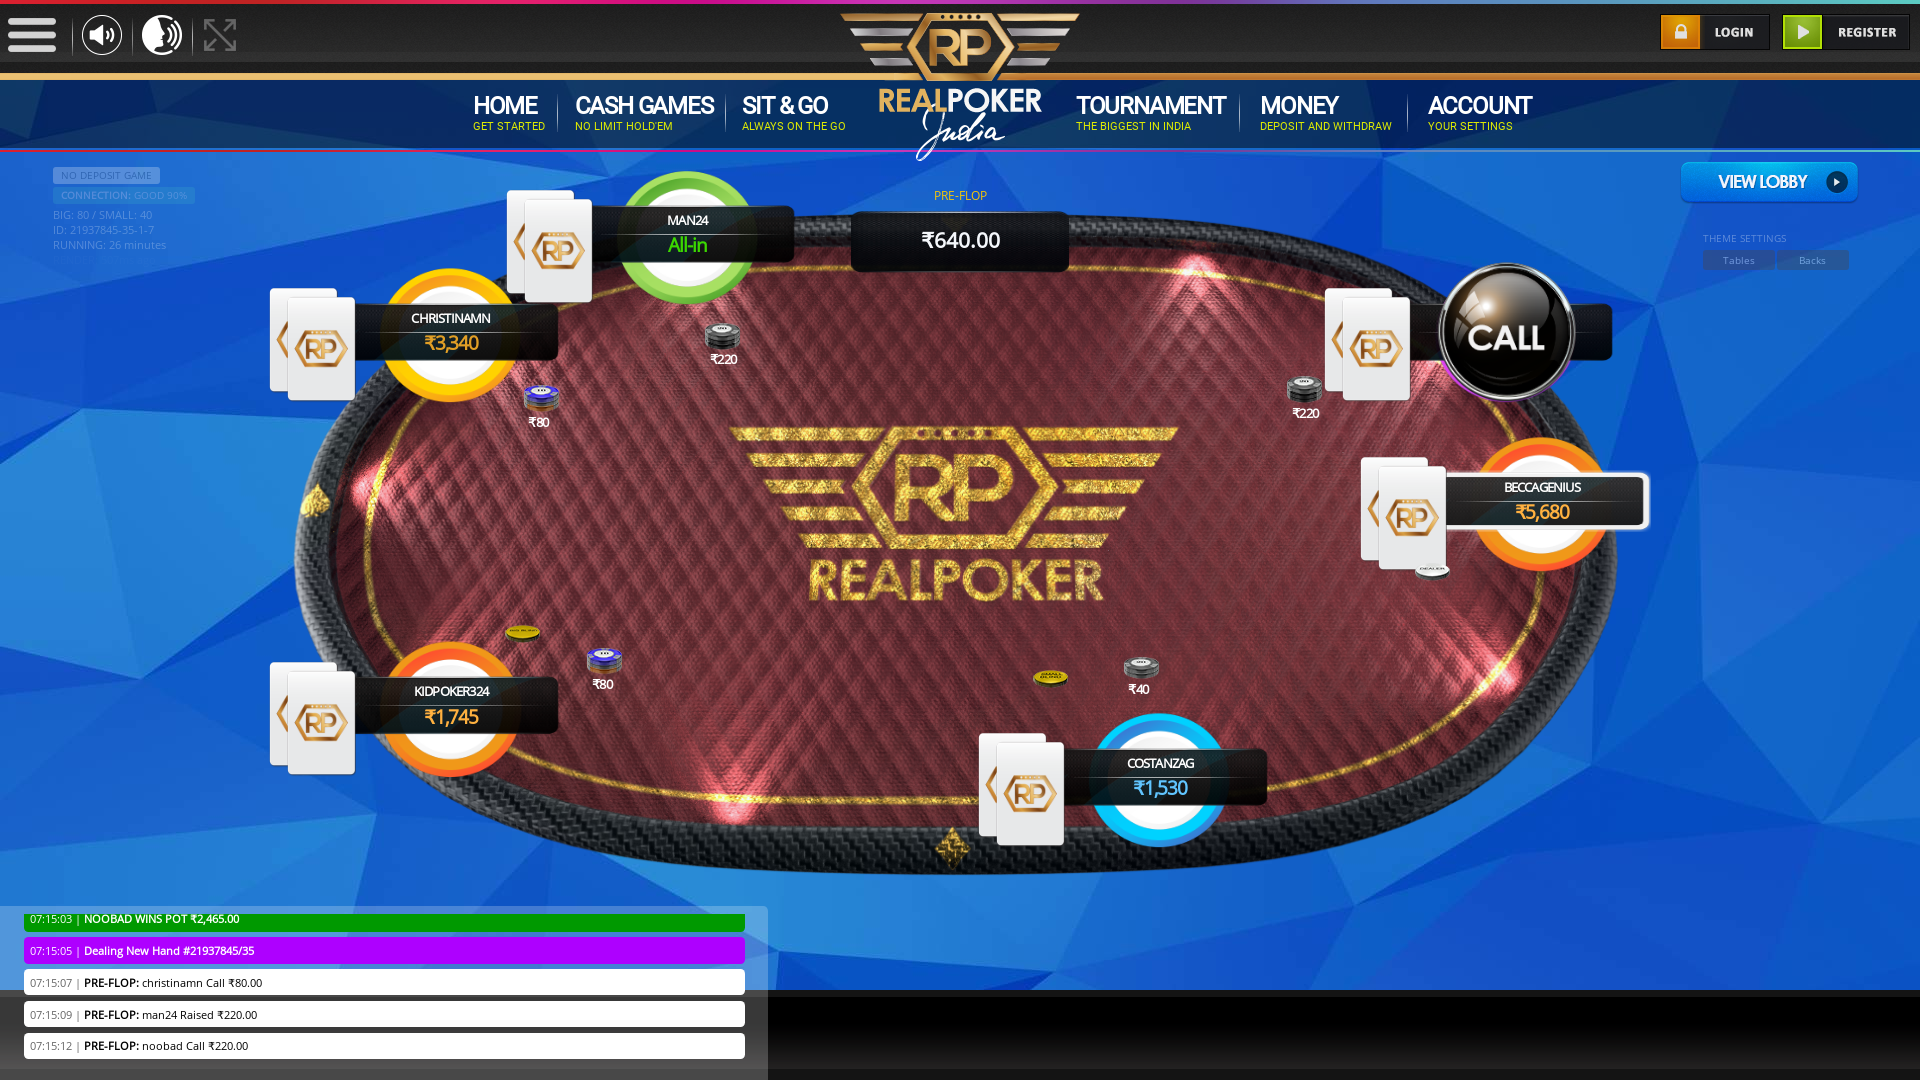 10 player texas holdem table at real poker with the table id 21937845